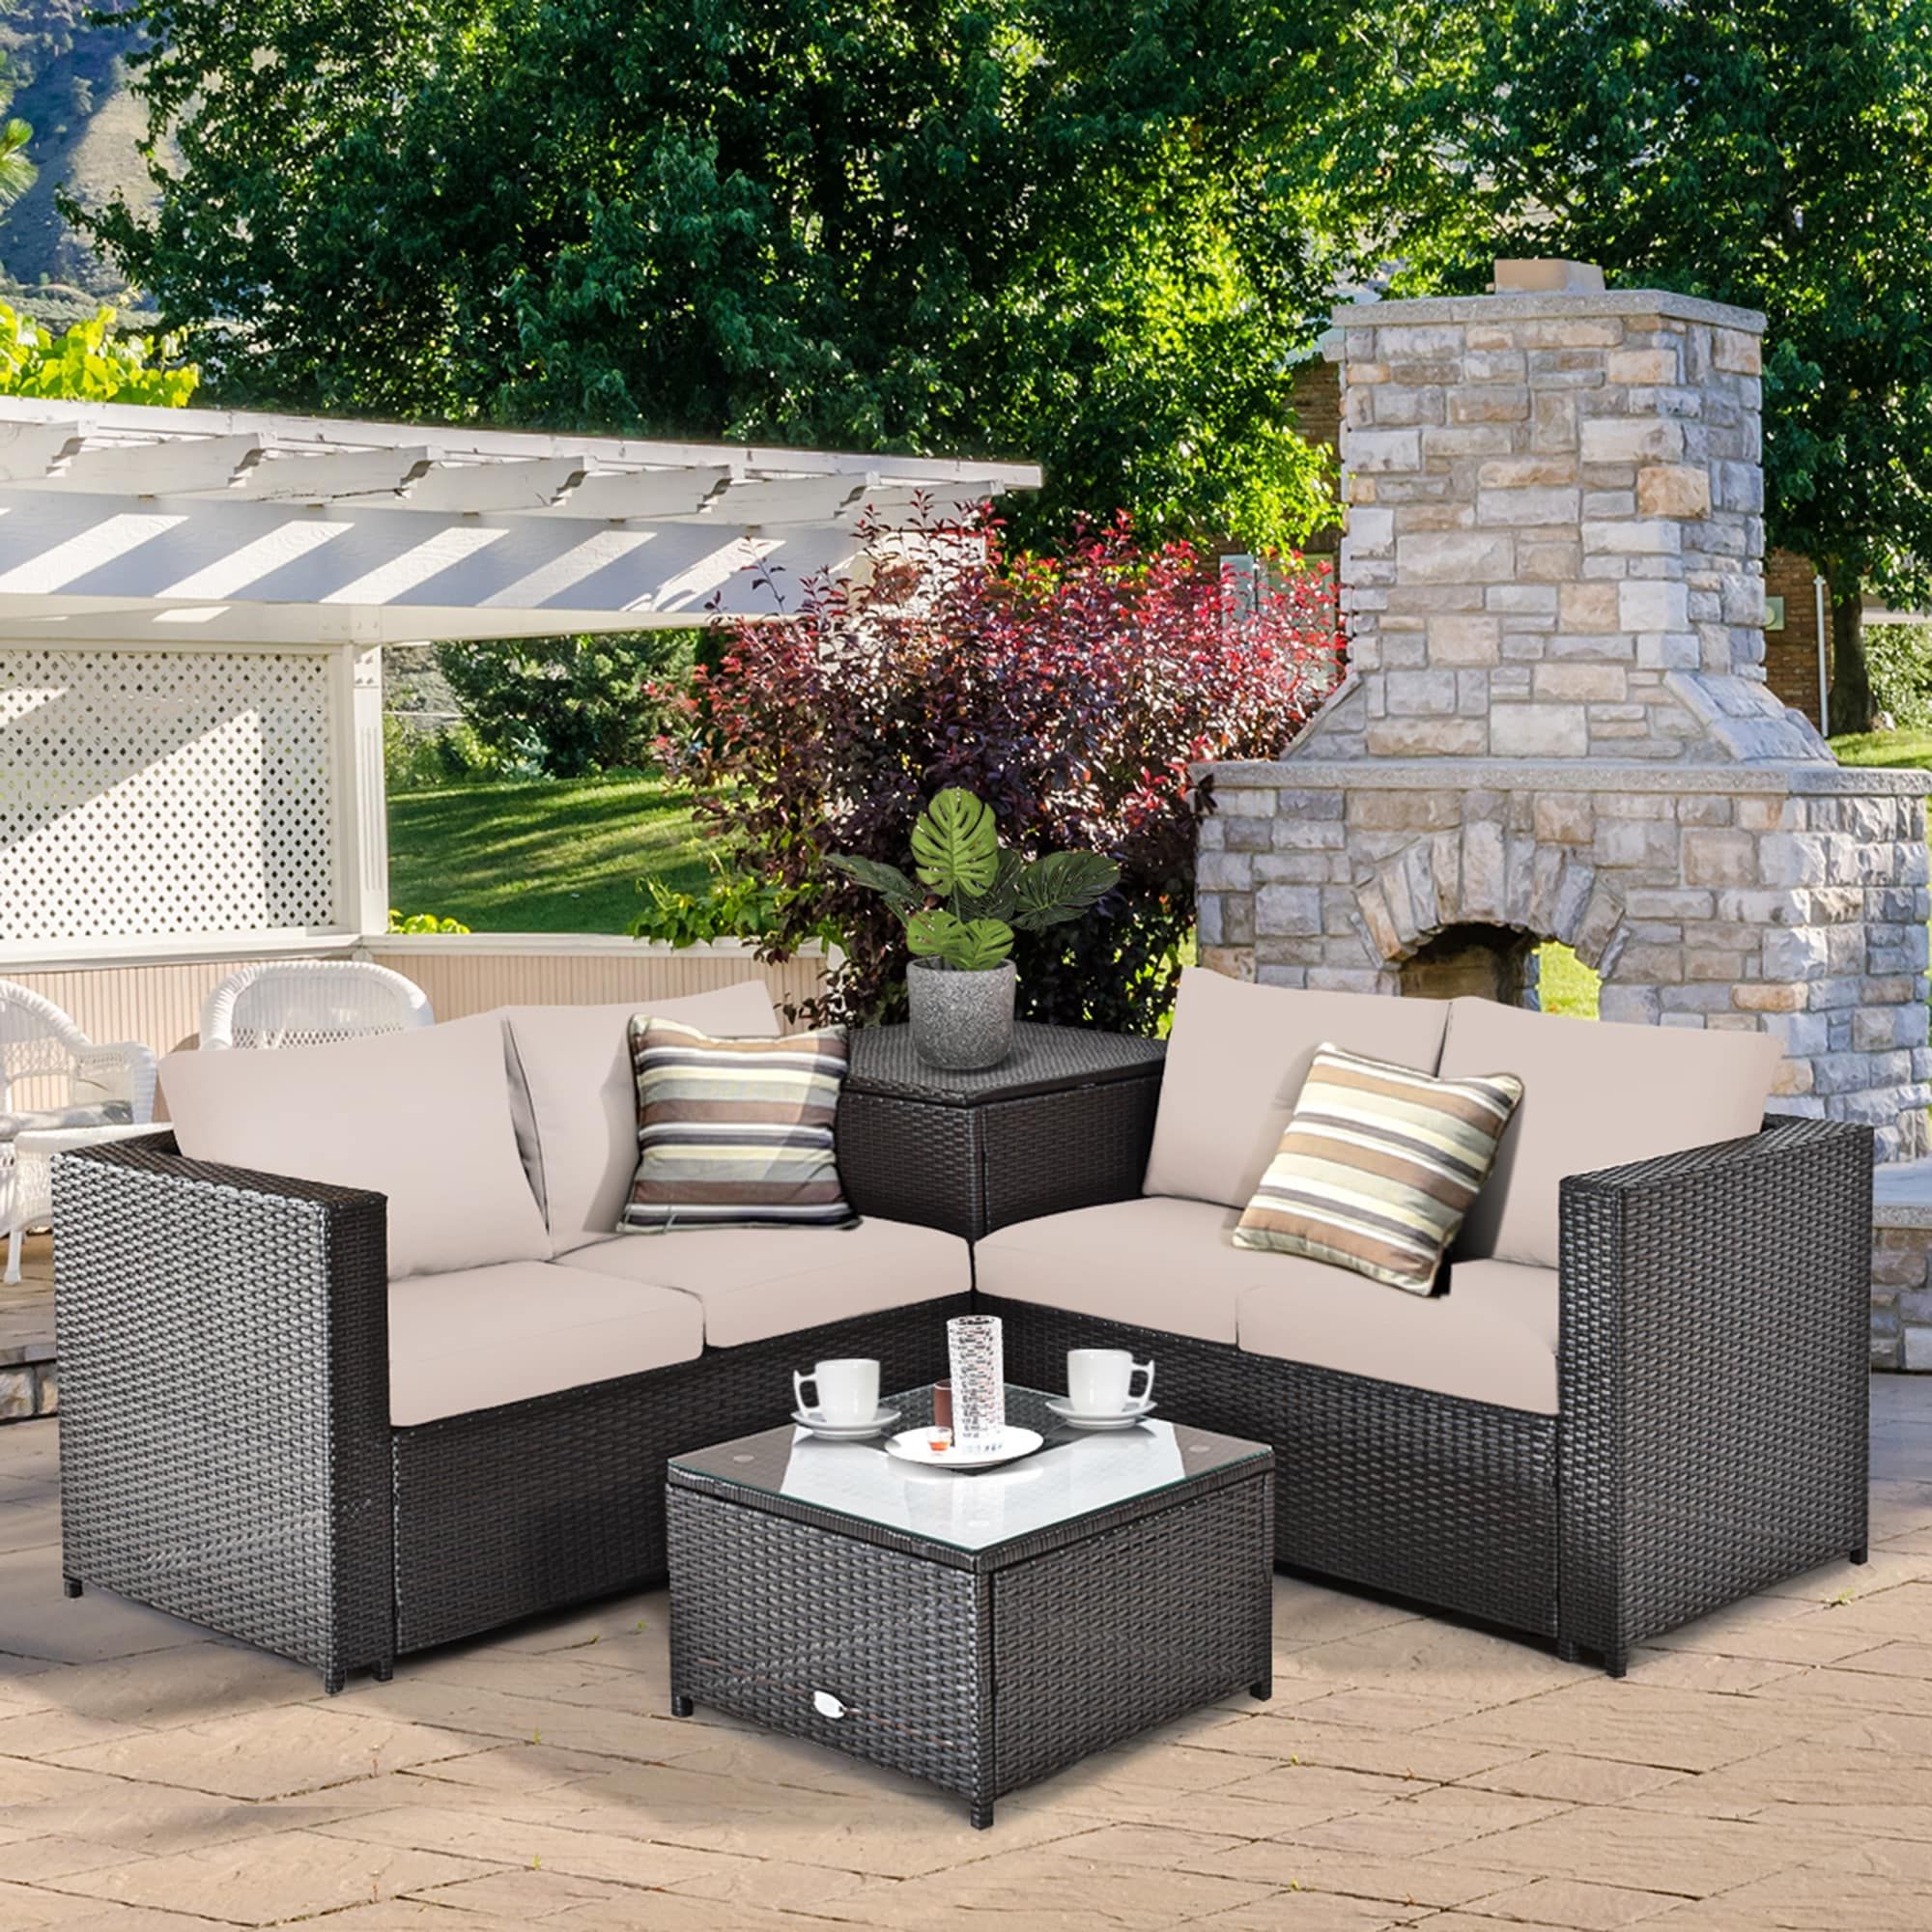 Gymax 4pcs Cushioned Rattan Patio Conversation Set W/ Coffee Table – On  Sale – Bed Bath & Beyond – 35488757 Pertaining To 2020 4pcs Rattan Patio Coffee Tables (View 3 of 10)